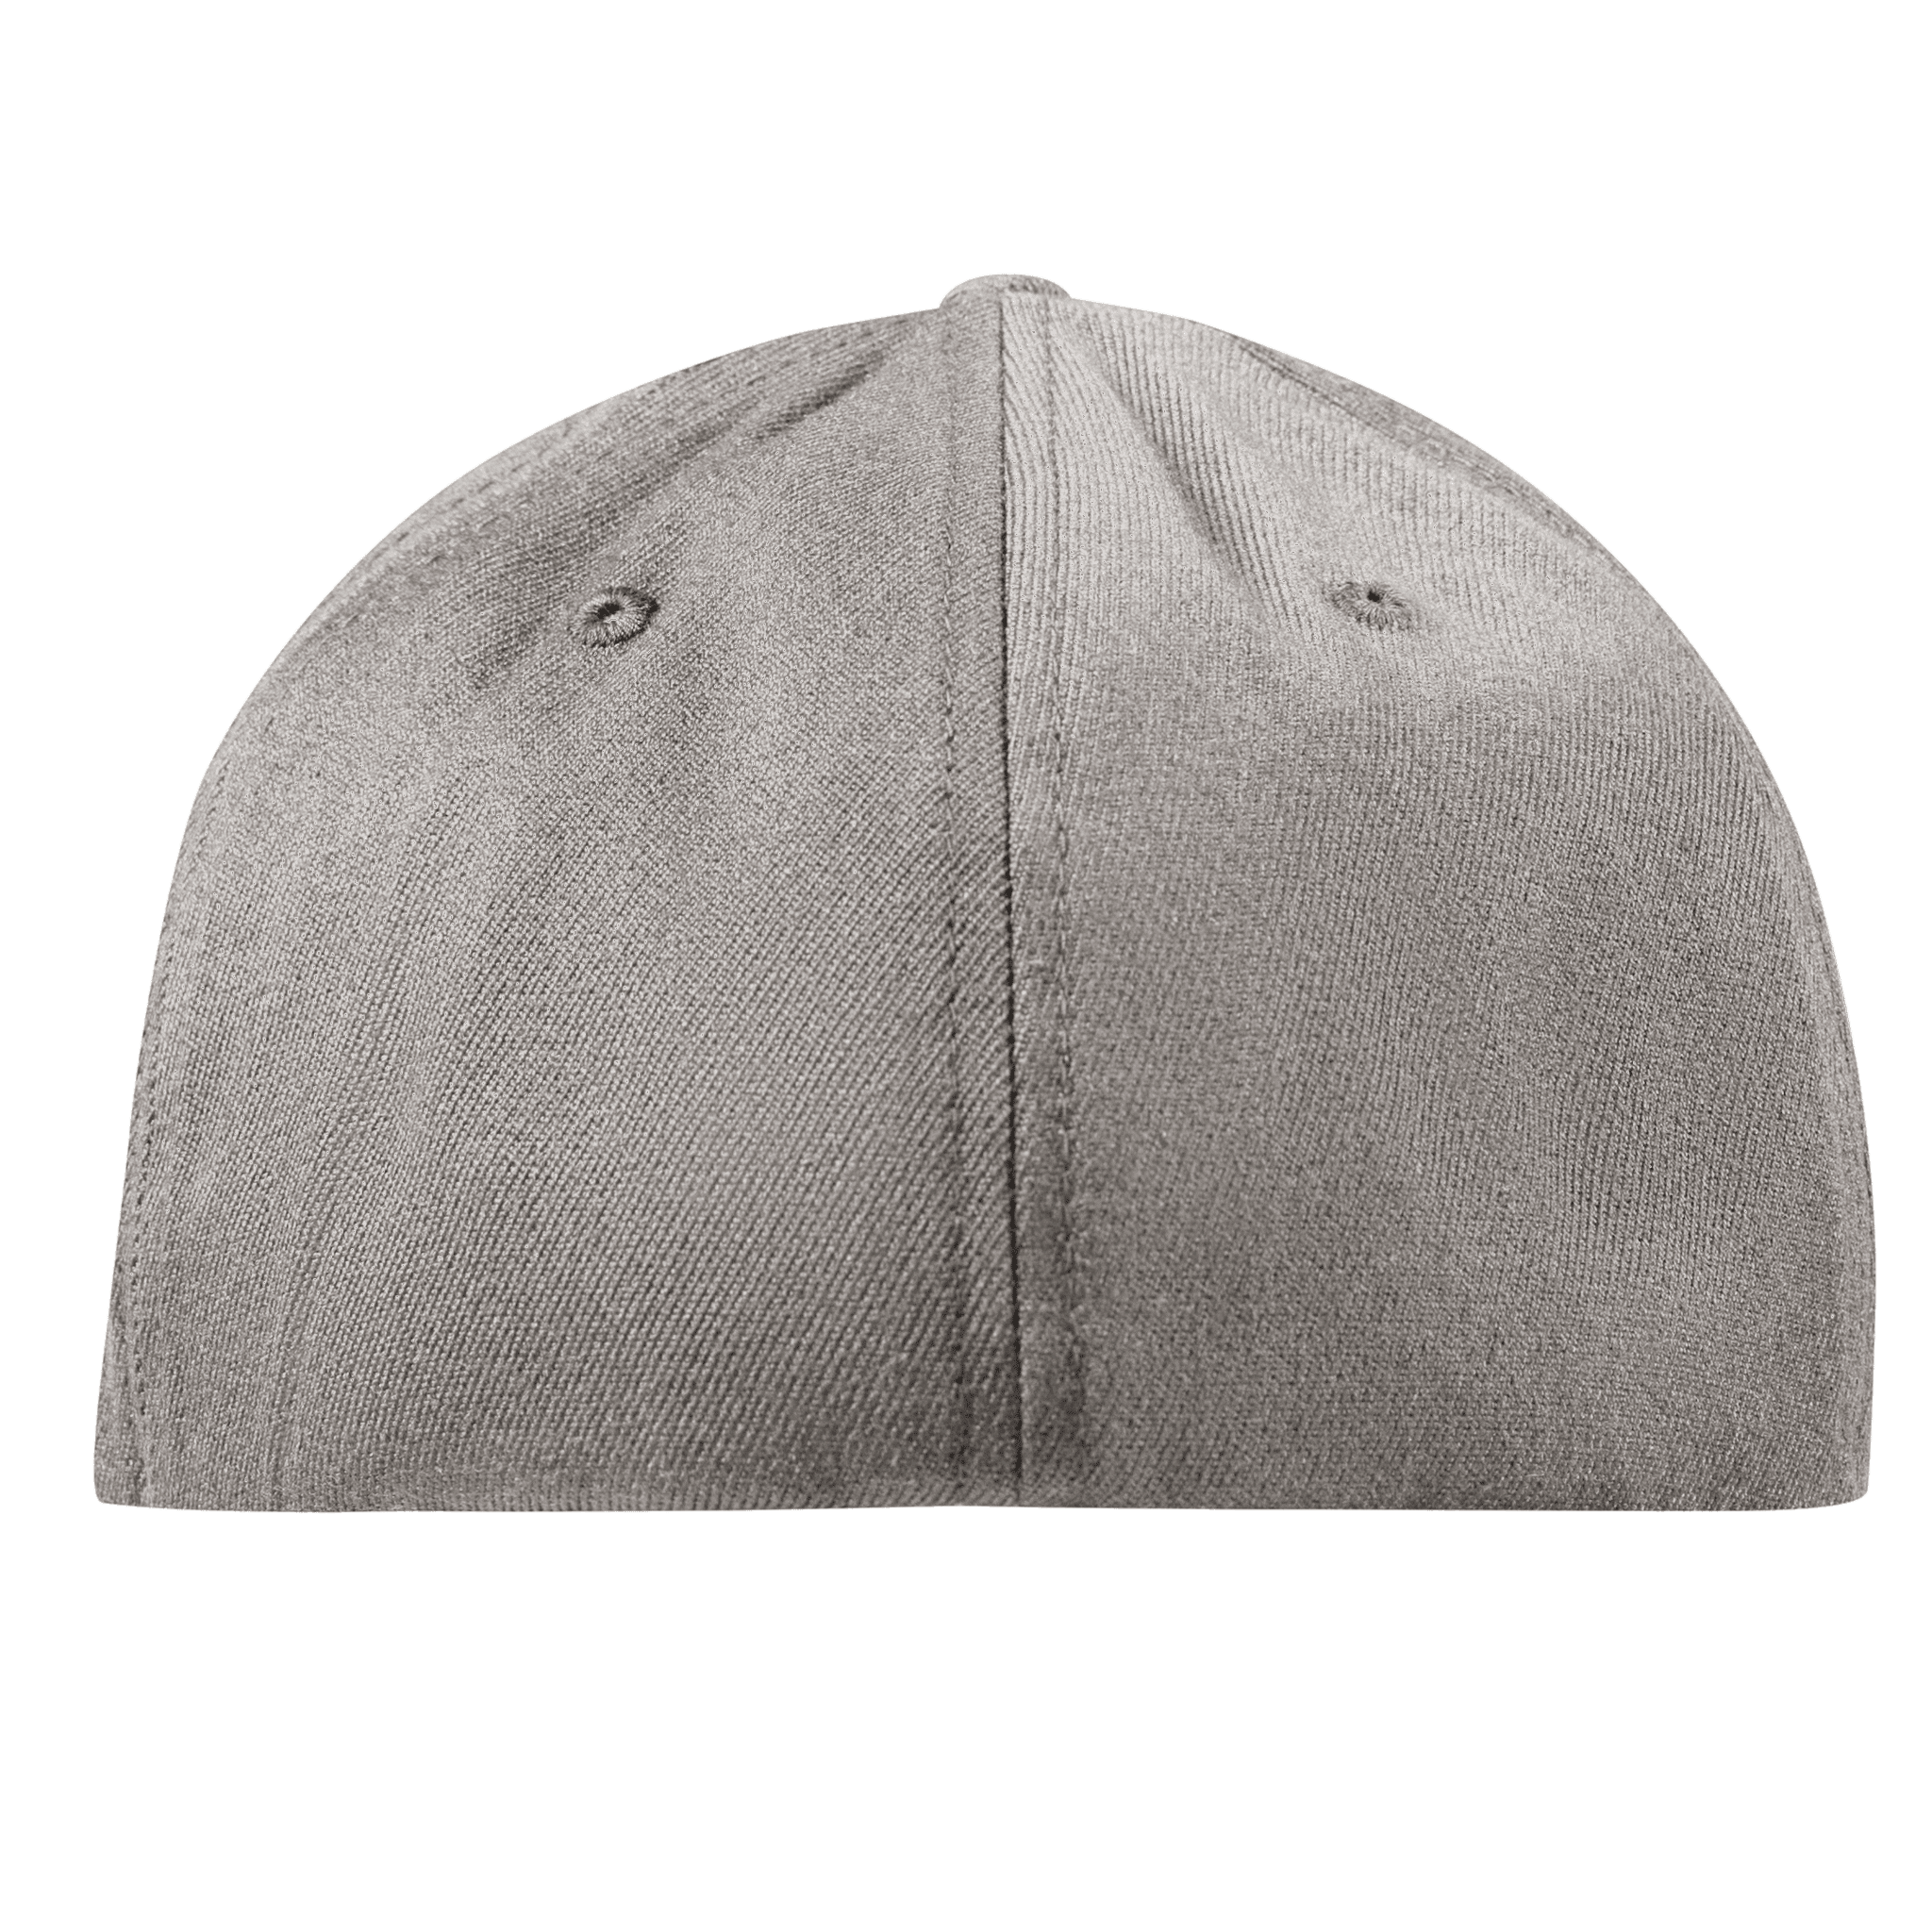 Indiana 19 Midnight Flexfit Fitted Back Heather Grey